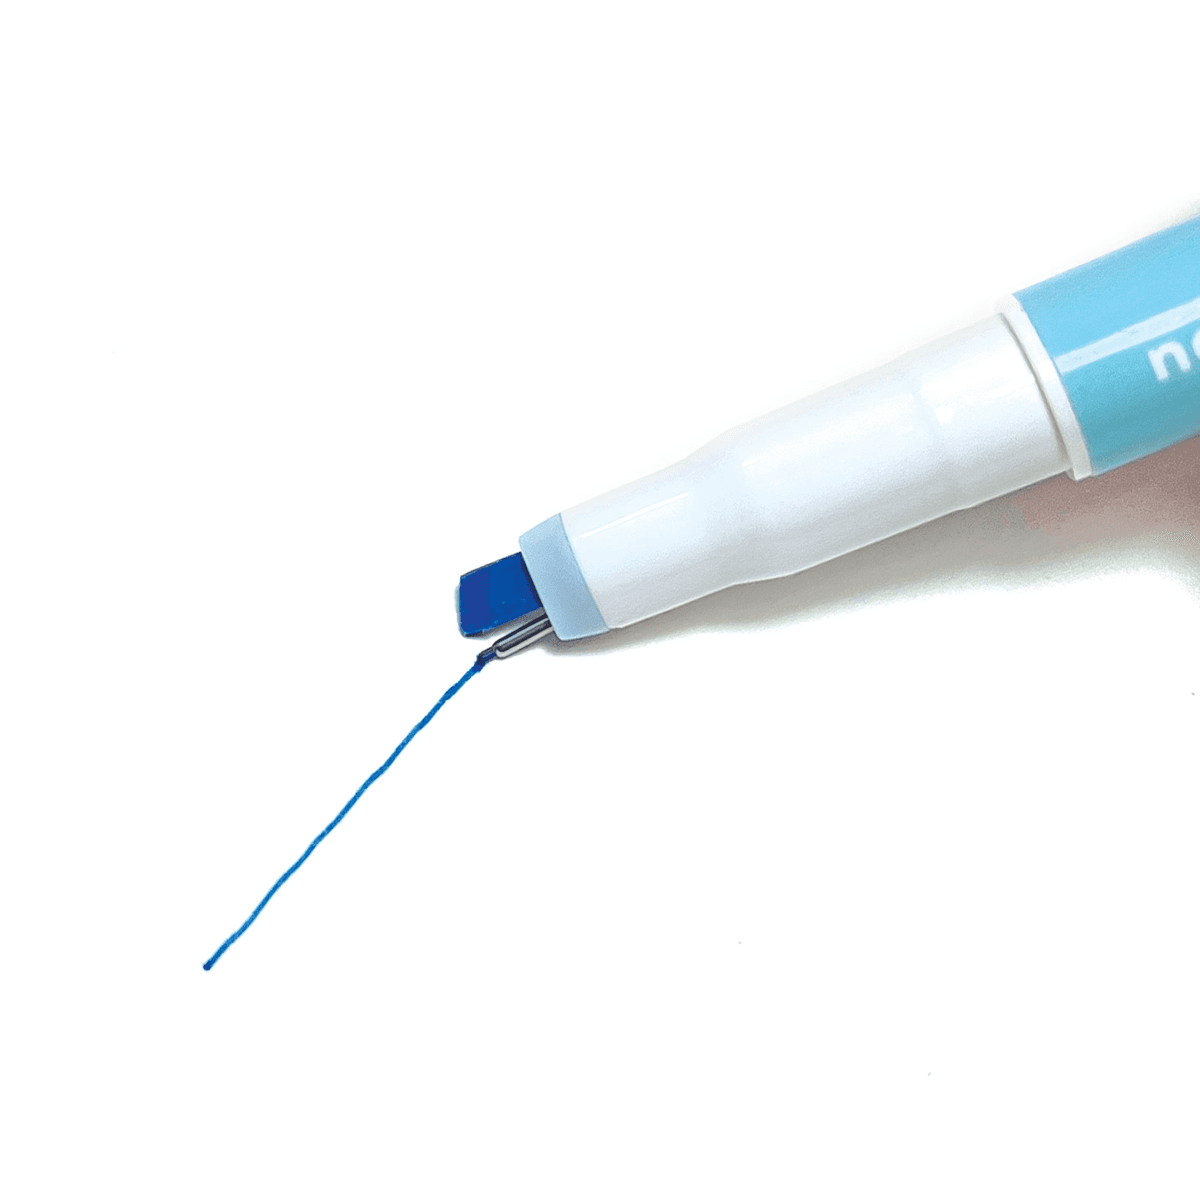 Noted! 2-in-1 micro fine pen and highlighter close up of blue pen writing